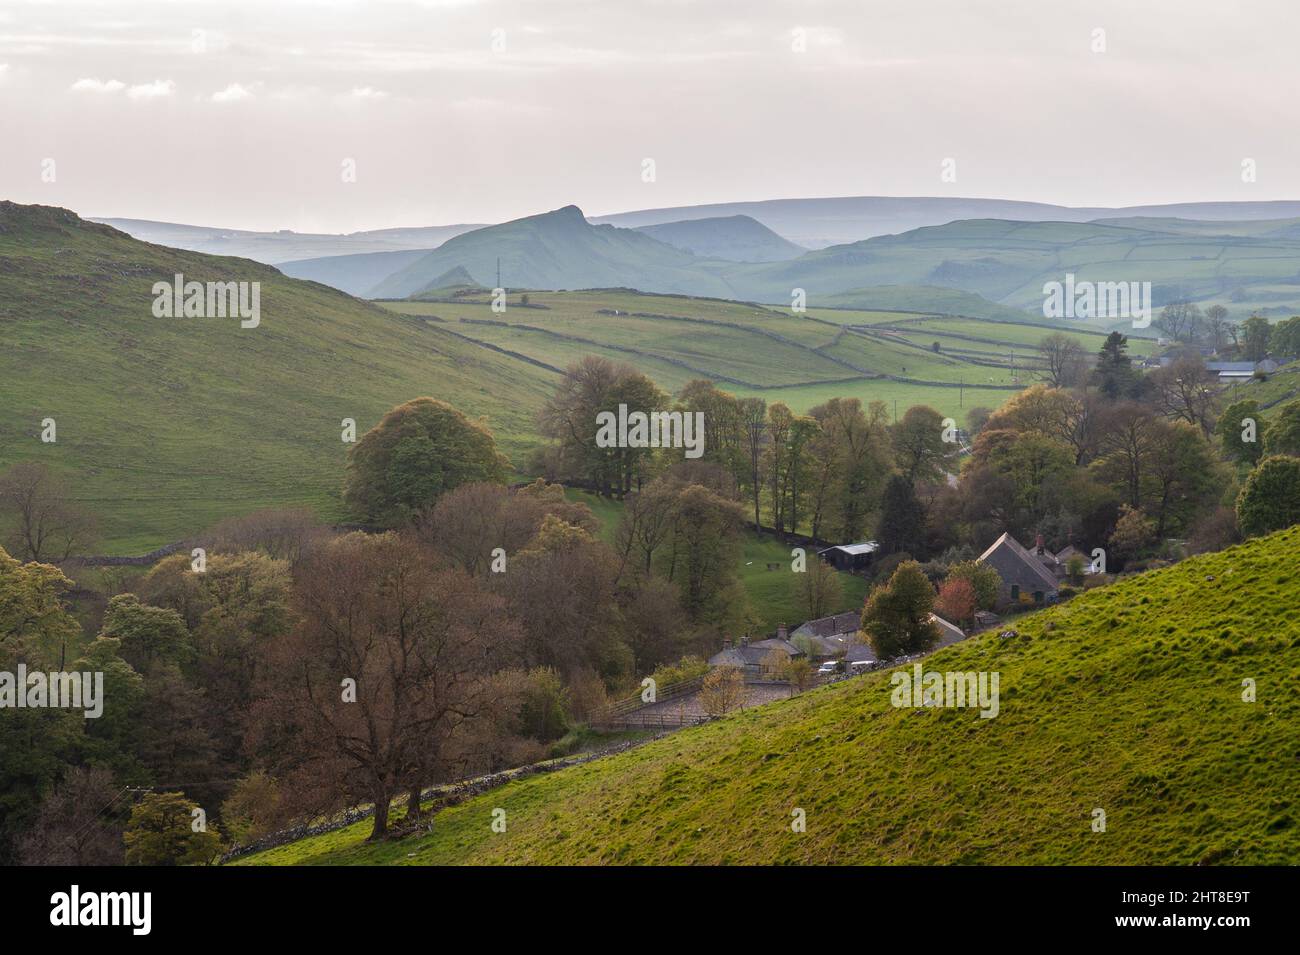 Earl Sterndale village is nestled in a valley under the hills of England's Peak District, including the distinctive Chrome Hill and Parkhouse Hill. Stock Photo